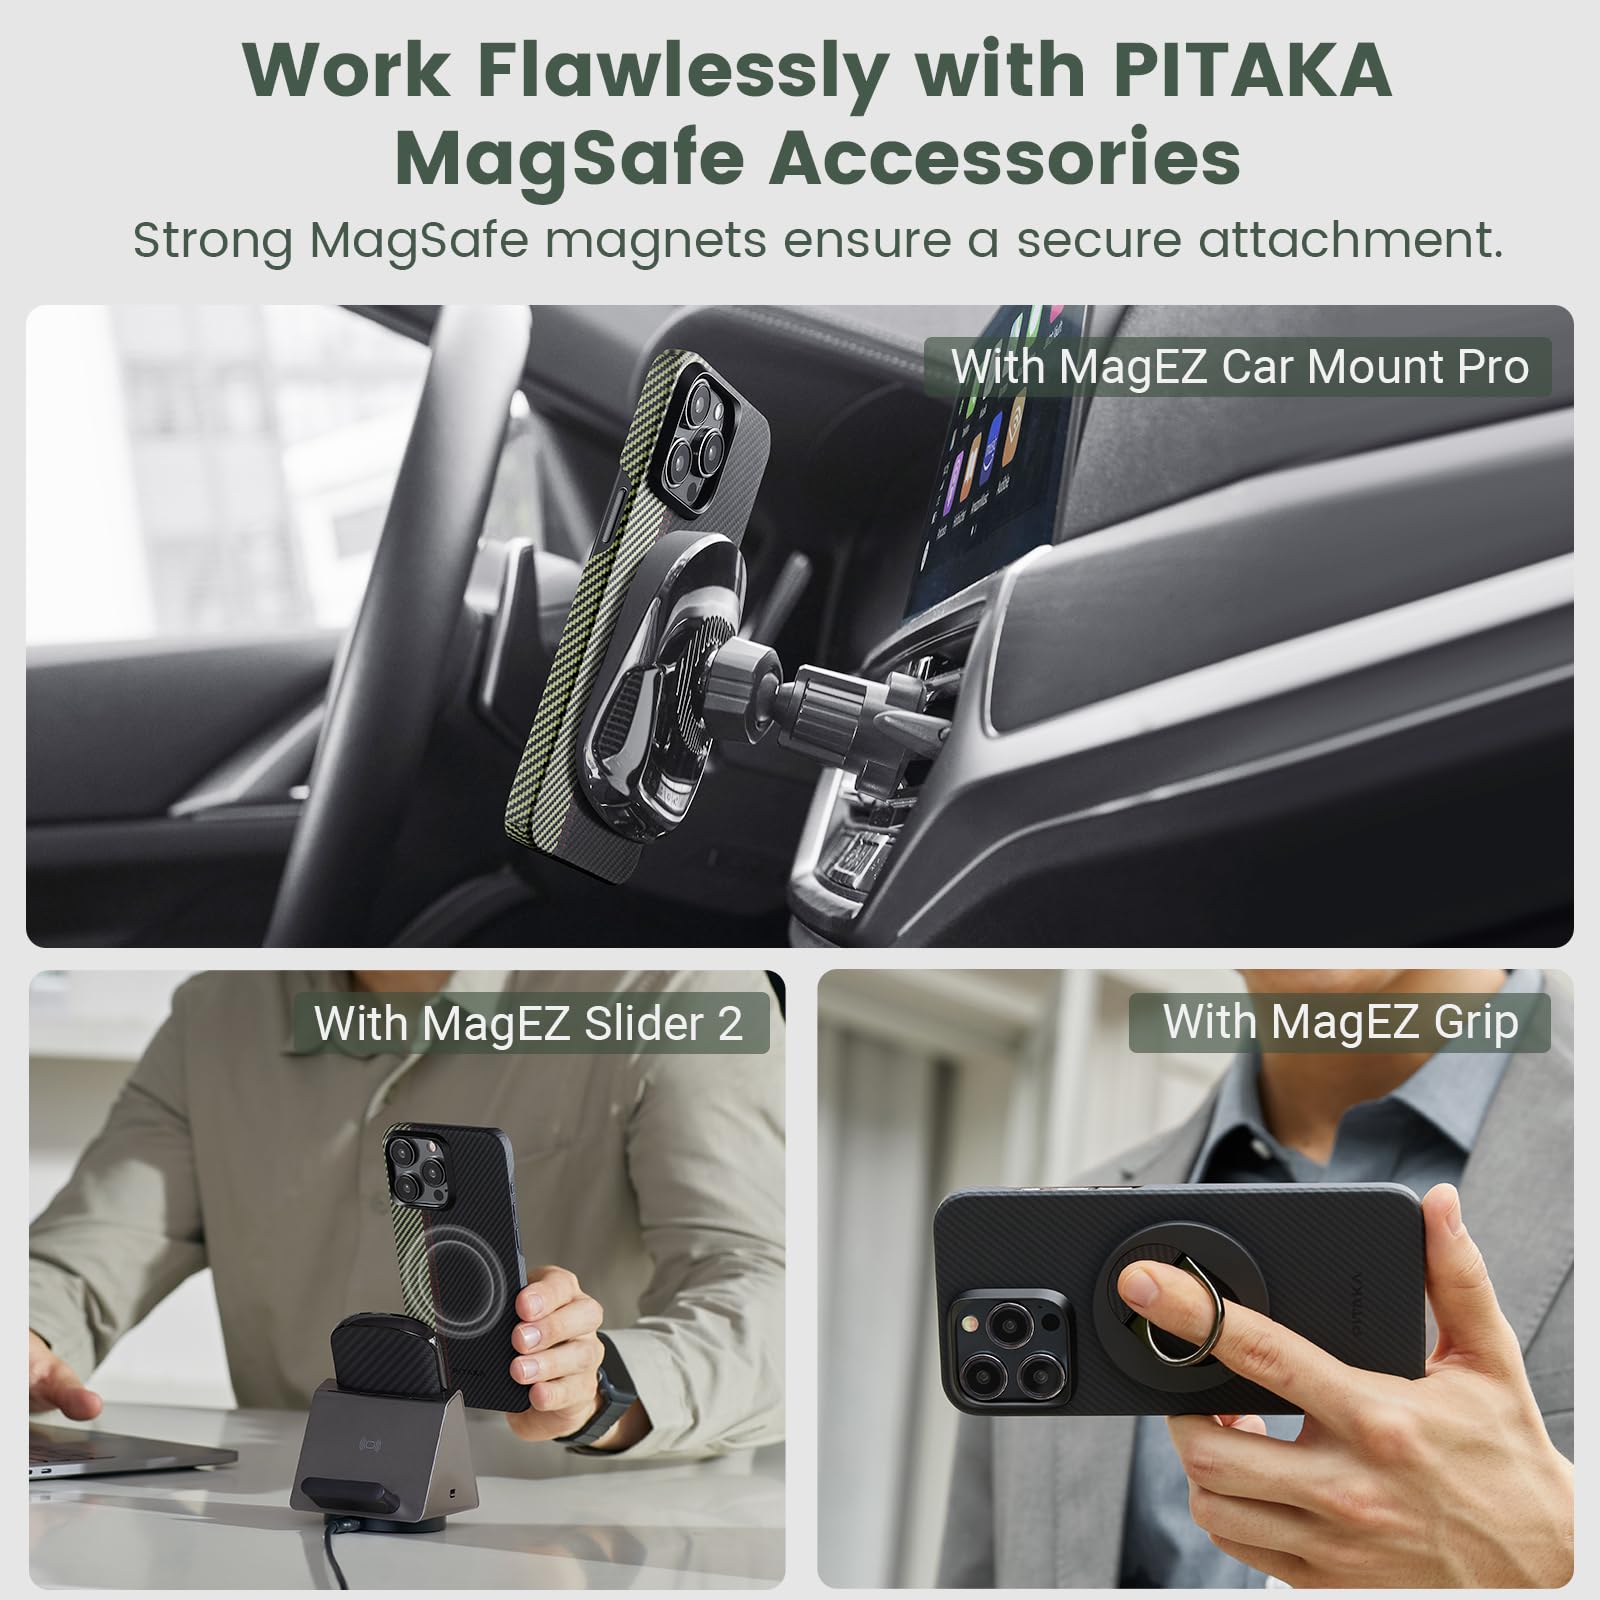 PITAKA Case for iPhone 15 Pro Max Compatible with MagSafe, Slim & Light iPhone 15 Pro Max Case 6.7-inch with a Case-Less Touch Feeling, 600D Aramid Fiber Made [Fusion Weaving MagEZ Case 4 - Overture]